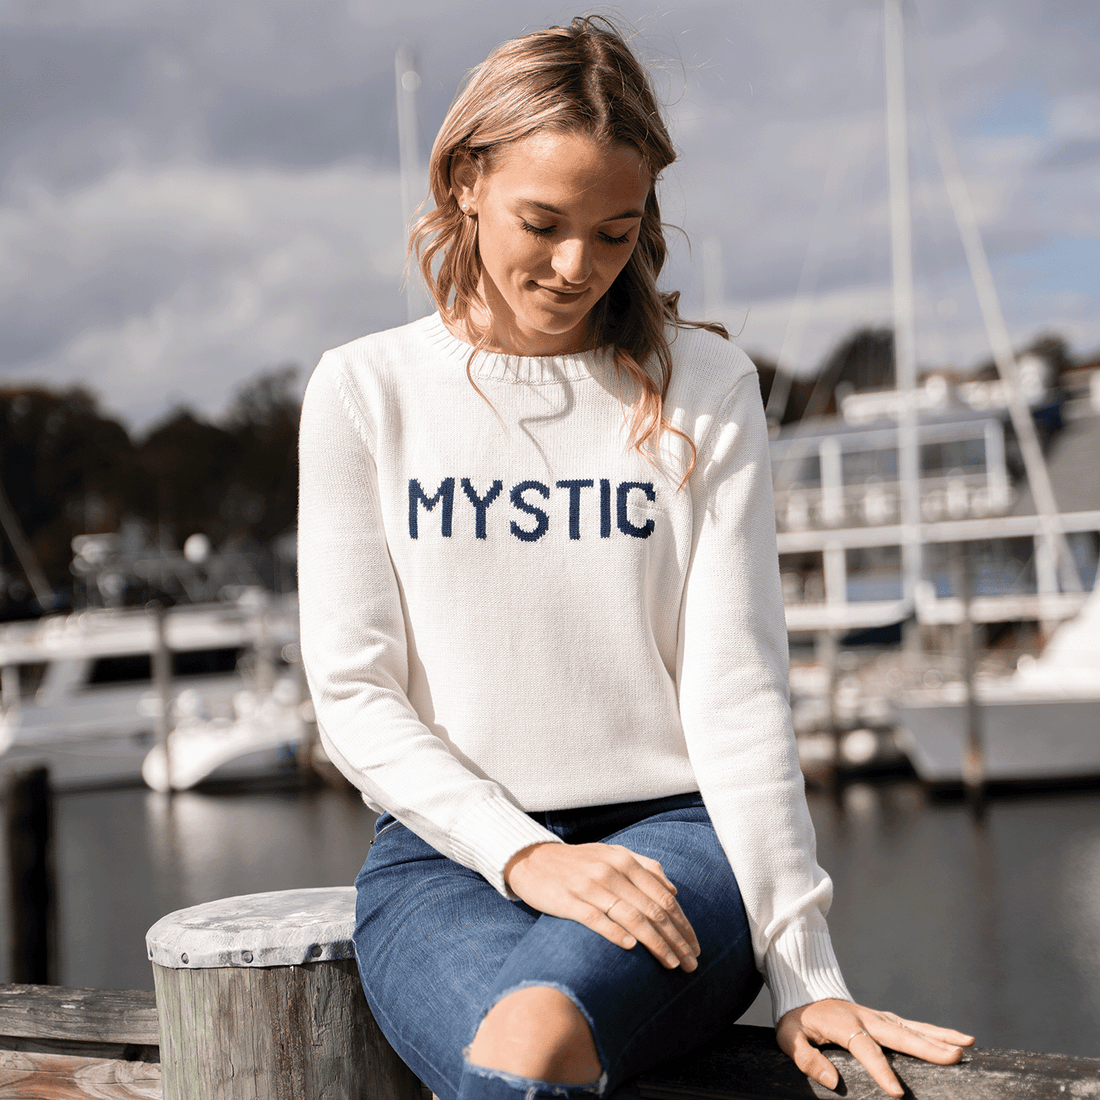 Mystic Clothing Trends for Fall 2022